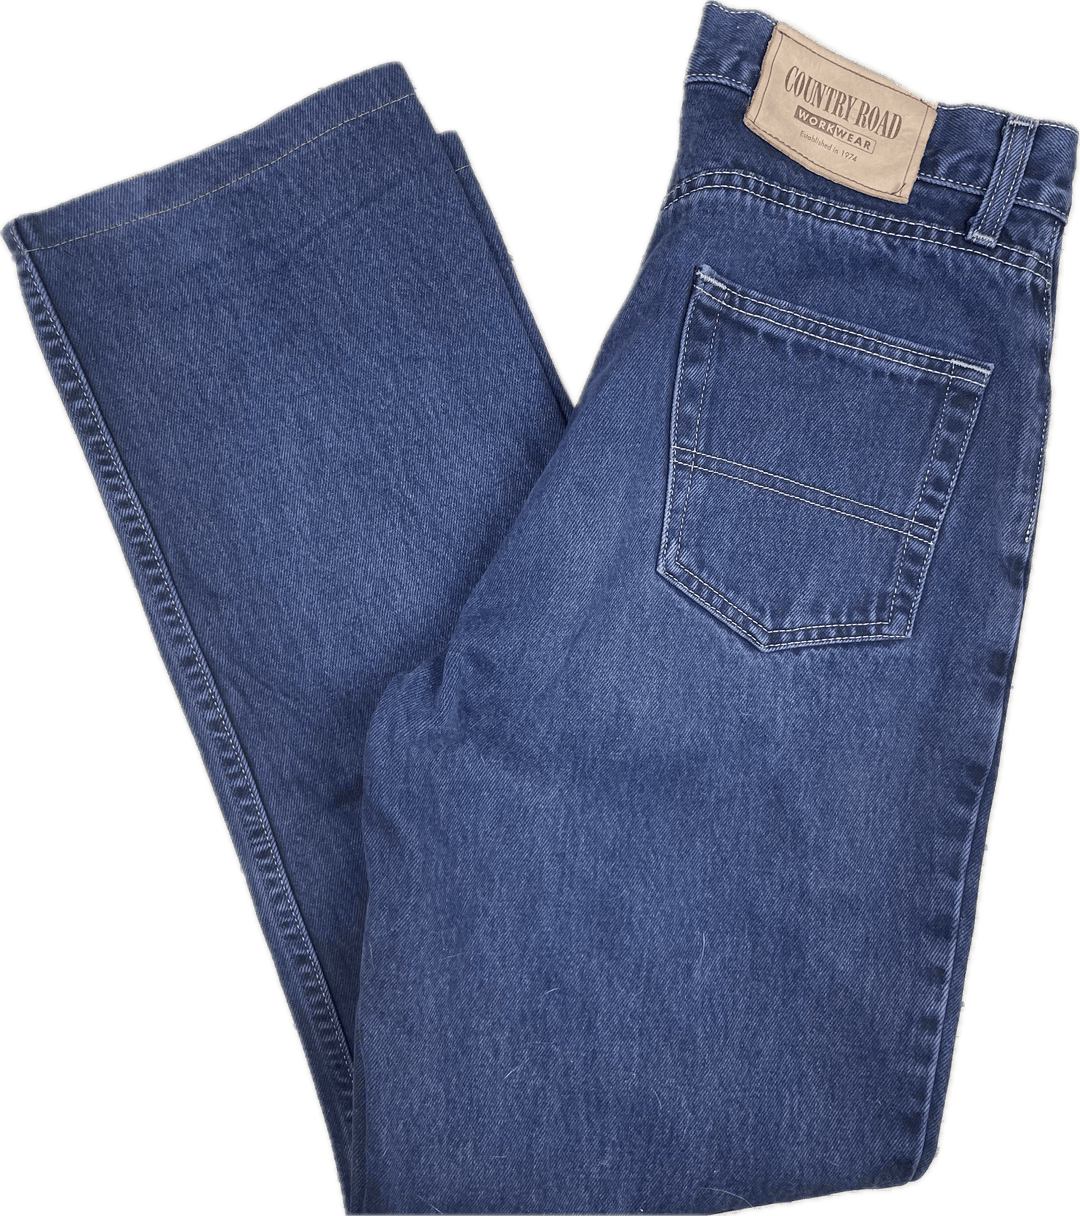 Country Road Australian Made Vintage 90's Mens Jeans- Size 30 - Jean Pool